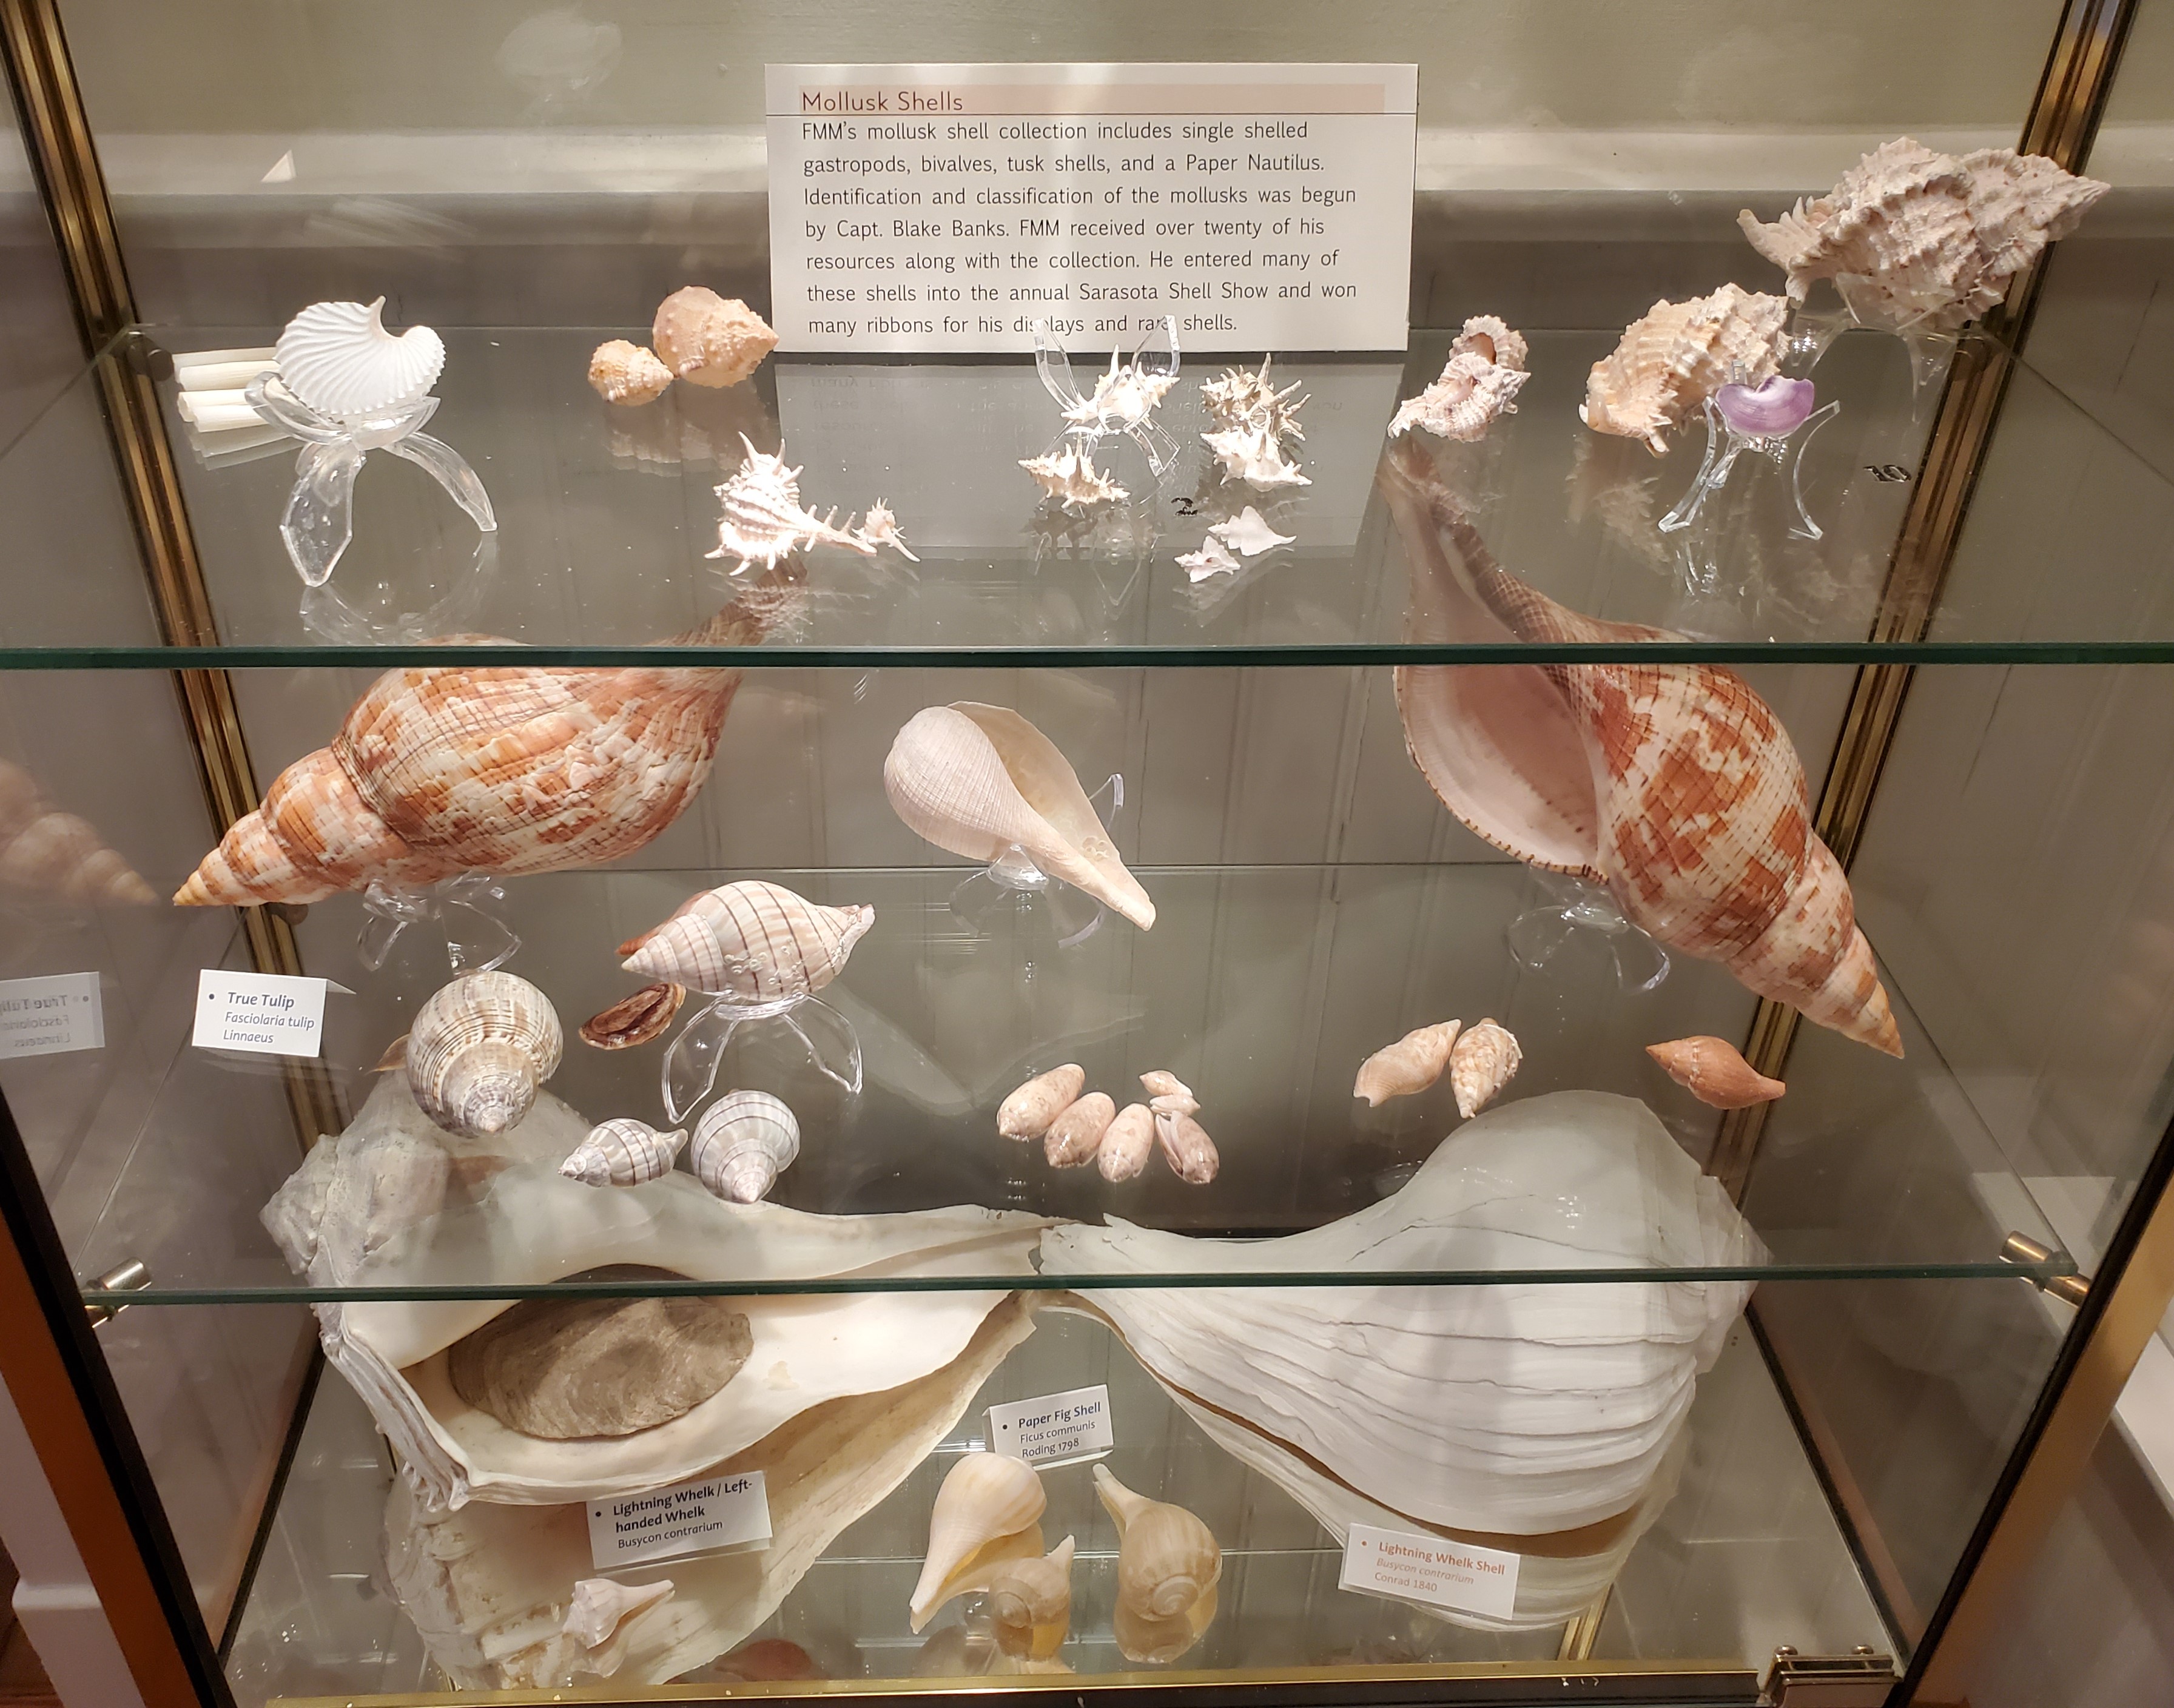 Florida Maritime Museum’s mollusk shell collection includes single shelled gastropods, bivalves, tusk shells, and a paper nautilus. Identification and classification of the mollusks was begun by Capt. Blake Banks. He entered many of these shells into the annual Sarasota Shell Show and won many ribbons for his displays and rare shells. 